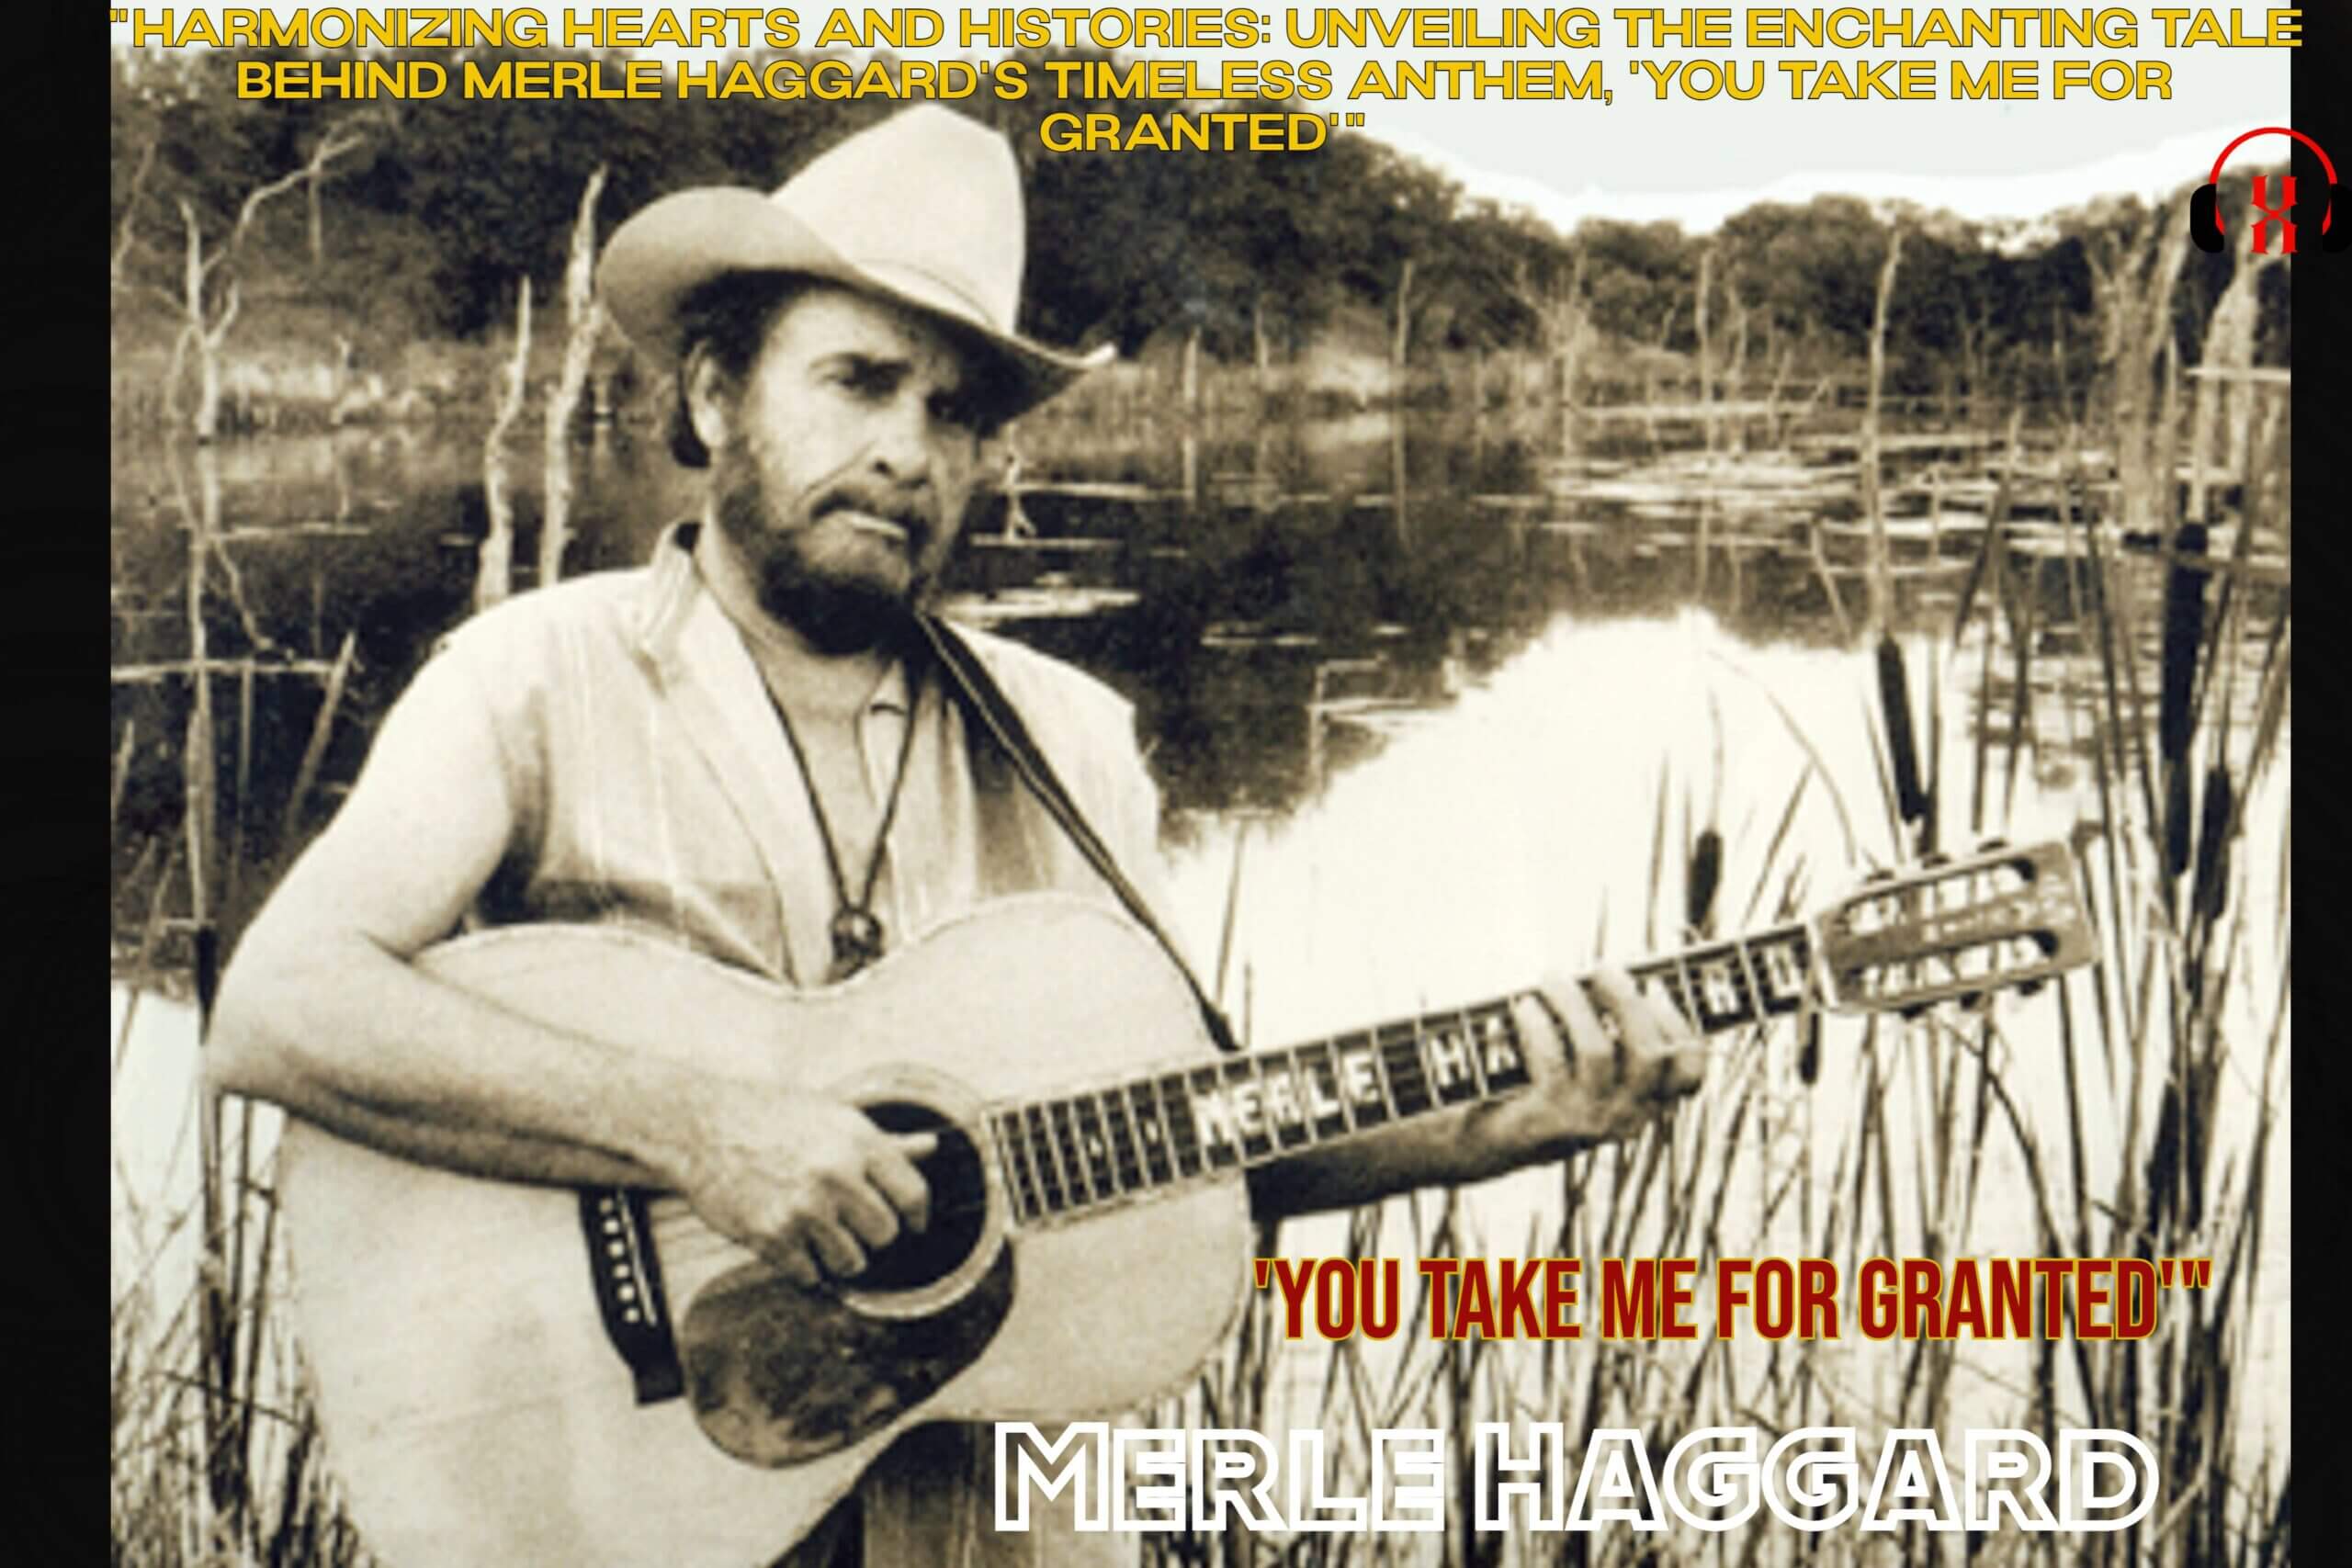 "Harmonizing Hearts and Histories: Unveiling the Enchanting Tale Behind Merle Haggard's Timeless Anthem, 'You Take Me for Granted'"